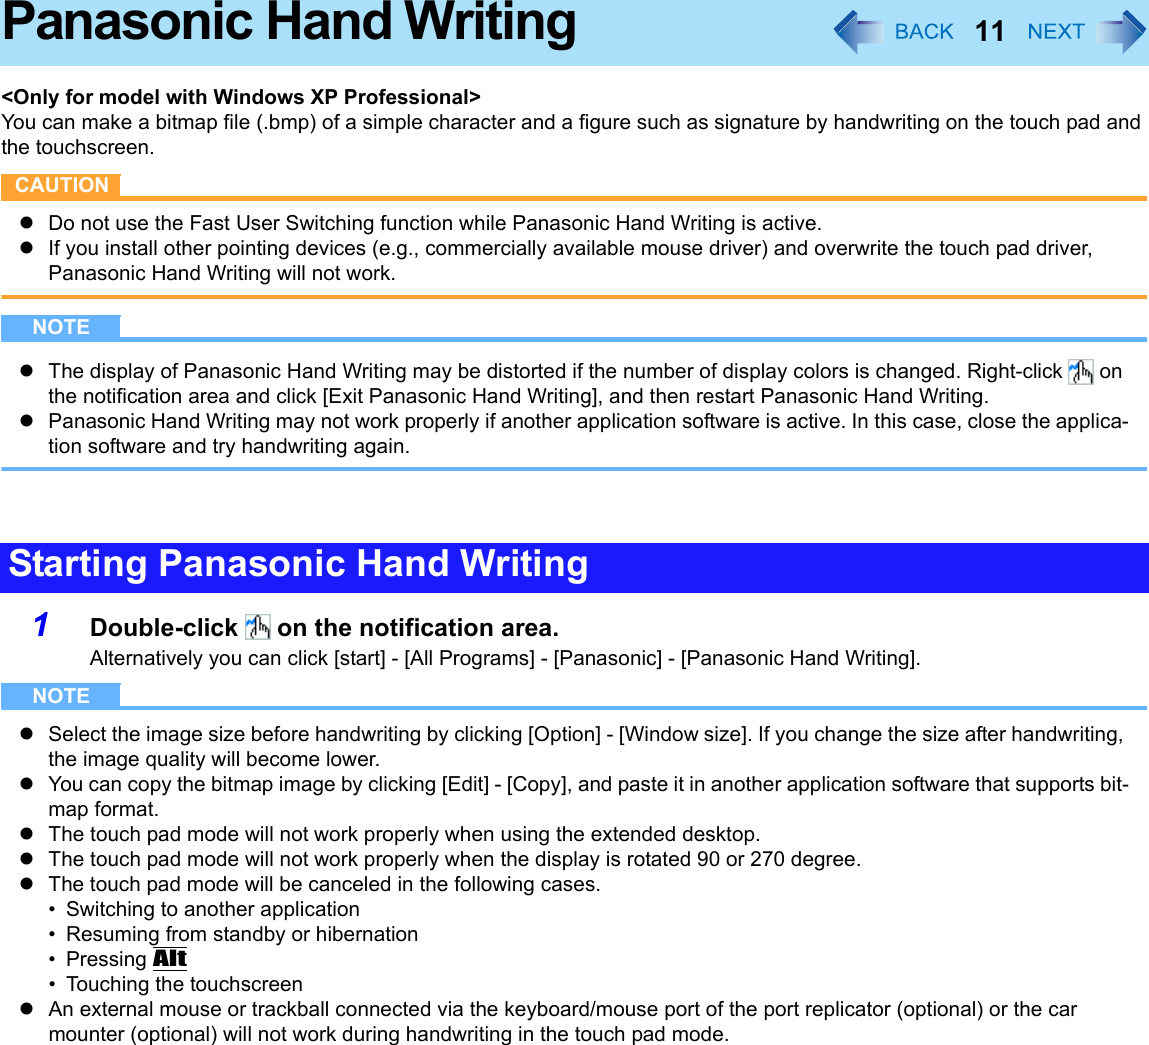 11Panasonic Hand Writing&lt;Only for model with Windows XP Professional&gt;You can make a bitmap file (.bmp) of a simple character and a figure such as signature by handwriting on the touch pad and the touchscreen.CAUTIONzDo not use the Fast User Switching function while Panasonic Hand Writing is active.zIf you install other pointing devices (e.g., commercially available mouse driver) and overwrite the touch pad driver, Panasonic Hand Writing will not work.NOTEzThe display of Panasonic Hand Writing may be distorted if the number of display colors is changed. Right-click   on the notification area and click [Exit Panasonic Hand Writing], and then restart Panasonic Hand Writing.zPanasonic Hand Writing may not work properly if another application software is active. In this case, close the applica-tion software and try handwriting again.1Double-click   on the notification area.Alternatively you can click [start] - [All Programs] - [Panasonic] - [Panasonic Hand Writing].NOTEzSelect the image size before handwriting by clicking [Option] - [Window size]. If you change the size after handwriting, the image quality will become lower.zYou can copy the bitmap image by clicking [Edit] - [Copy], and paste it in another application software that supports bit-map format.zThe touch pad mode will not work properly when using the extended desktop.zThe touch pad mode will not work properly when the display is rotated 90 or 270 degree.zThe touch pad mode will be canceled in the following cases.• Switching to another application• Resuming from standby or hibernation•Pressing Alt• Touching the touchscreenzAn external mouse or trackball connected via the keyboard/mouse port of the port replicator (optional) or the car mounter (optional) will not work during handwriting in the touch pad mode.Starting Panasonic Hand Writing